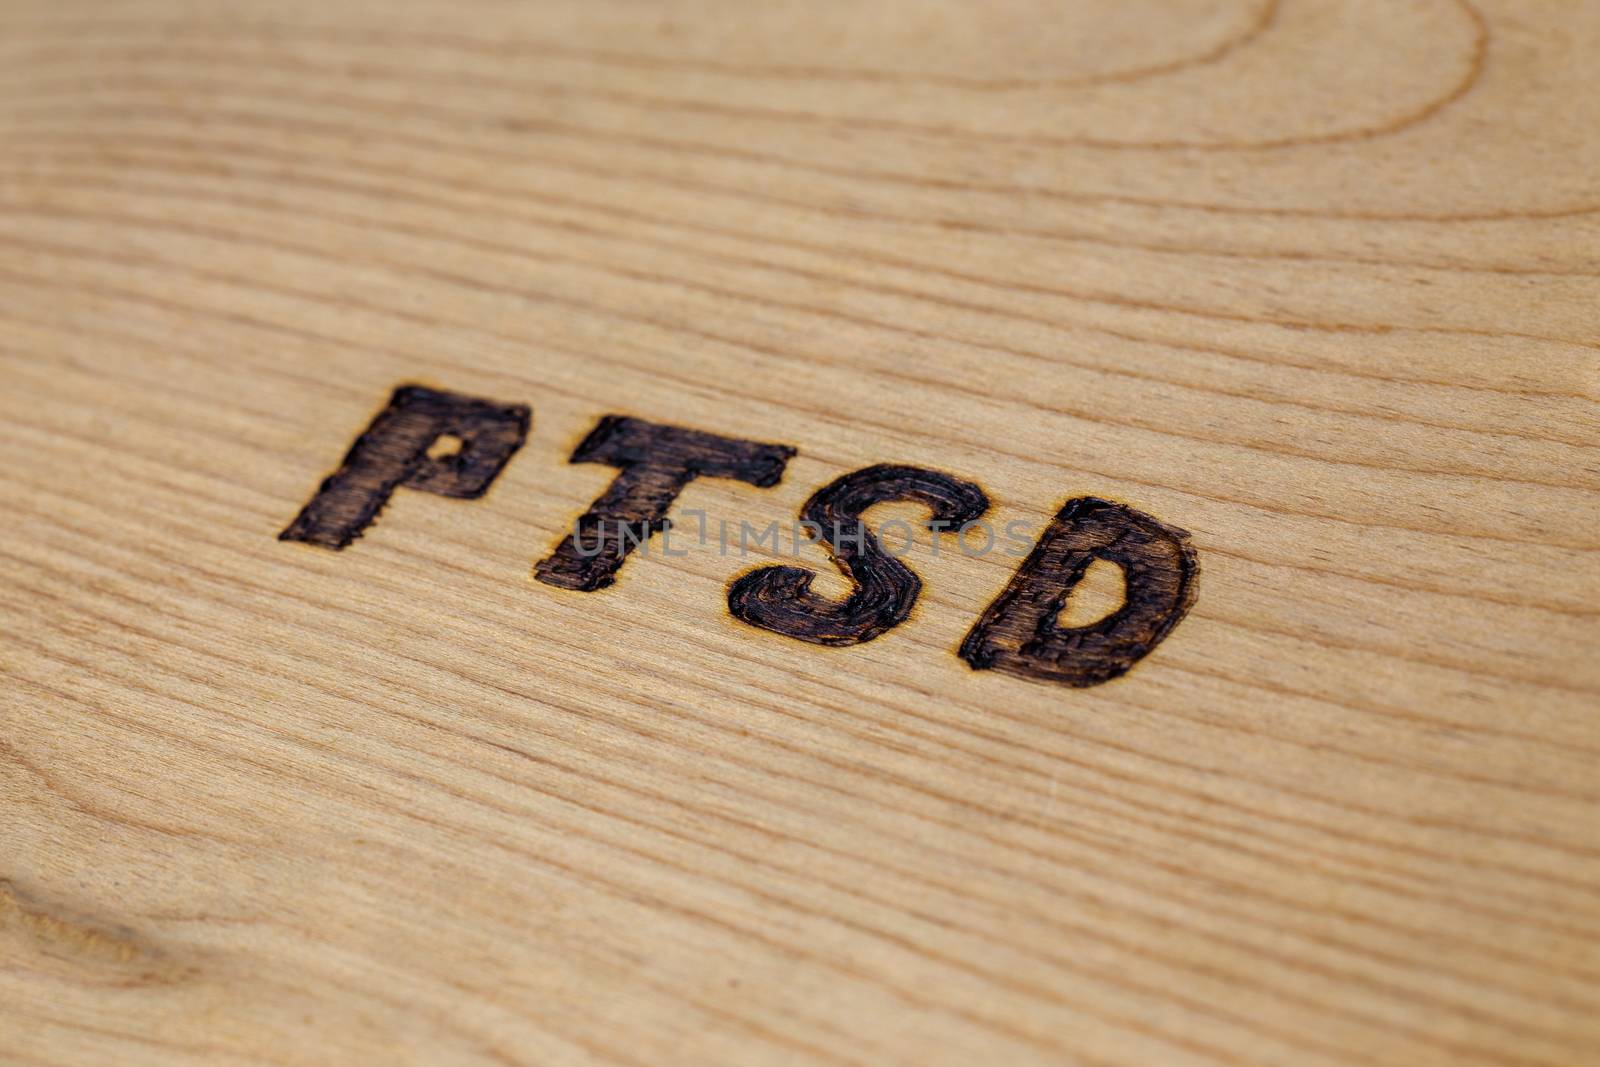 an abbreviation PTSD - post traumatic stress disorder - burned by hand on flat wooden board in diagonal composition by z1b